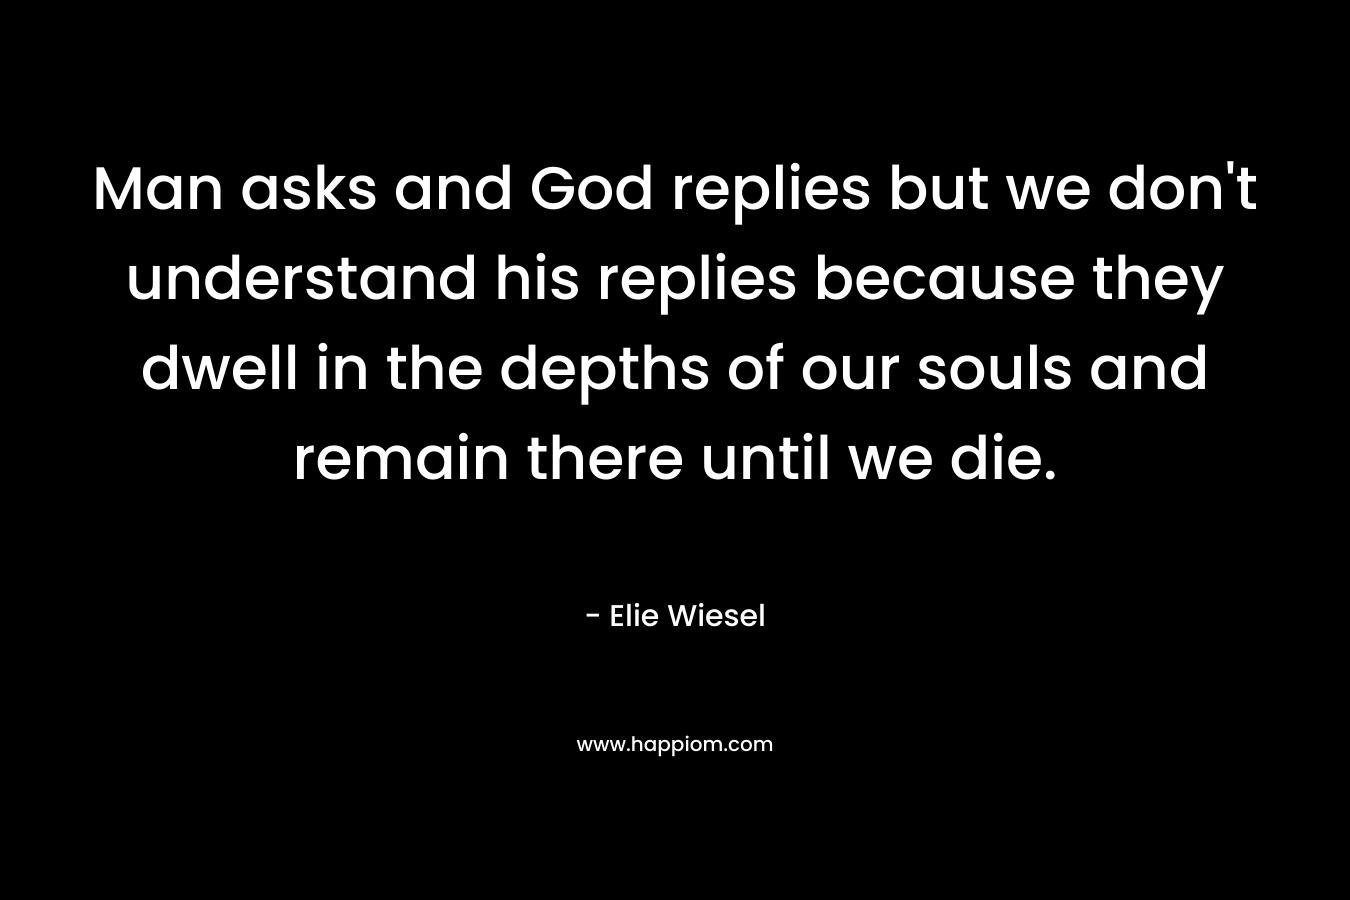 Man asks and God replies but we don’t understand his replies because they dwell in the depths of our souls and remain there until we die. – Elie Wiesel